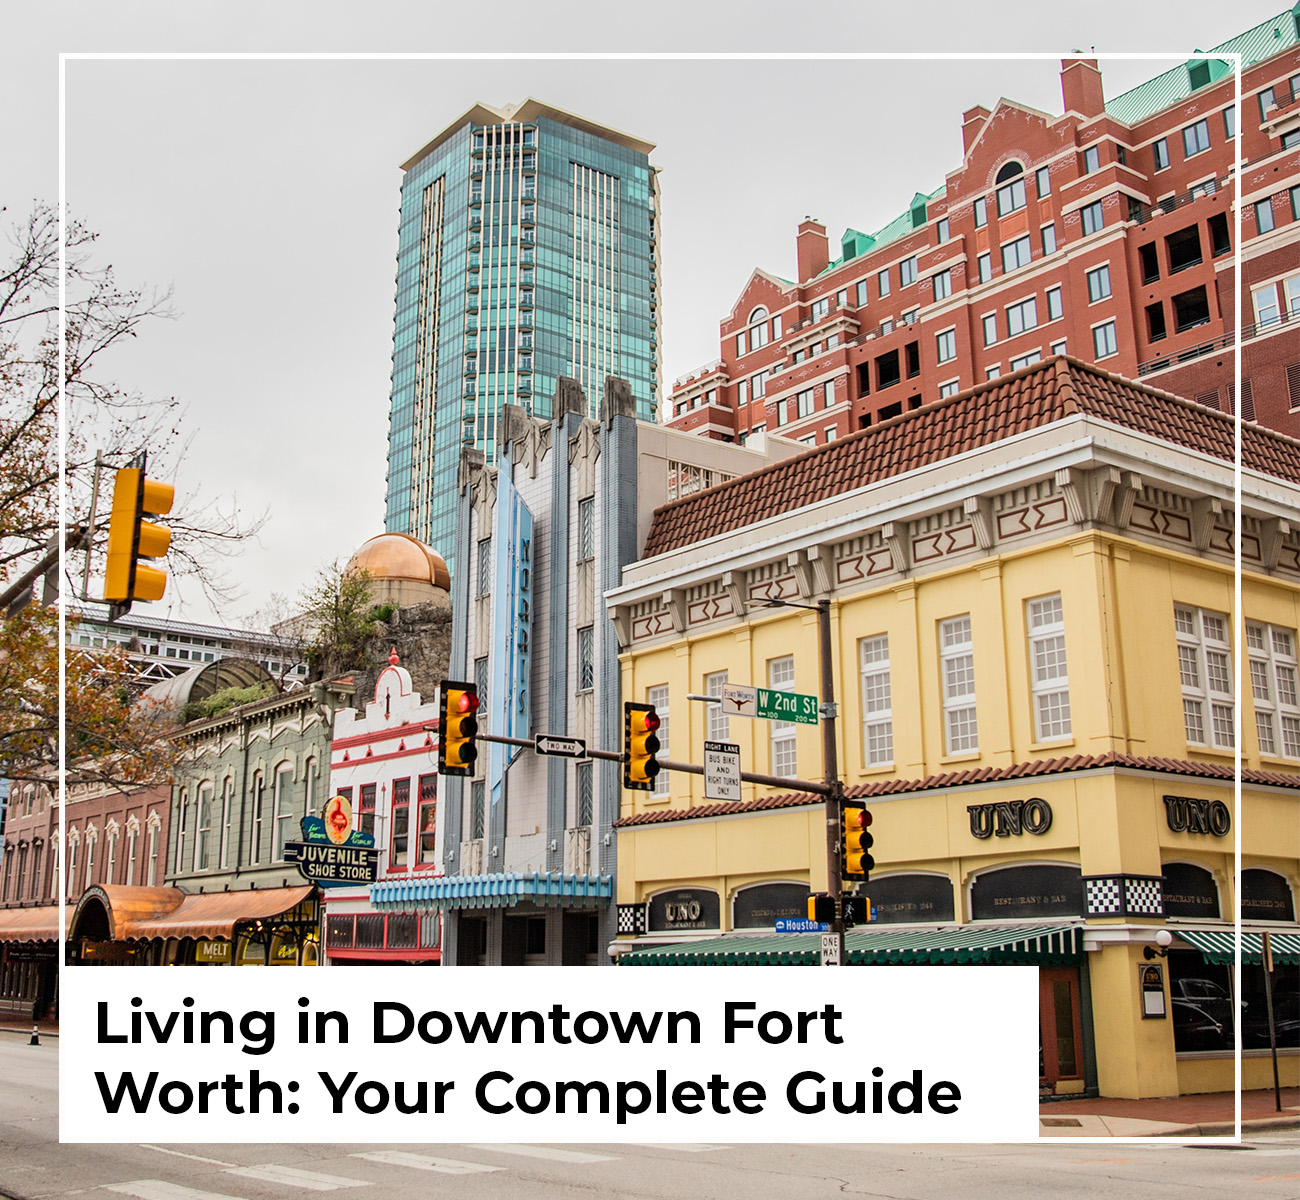 Living in Downtown Fort Worth: Your Complete Guide